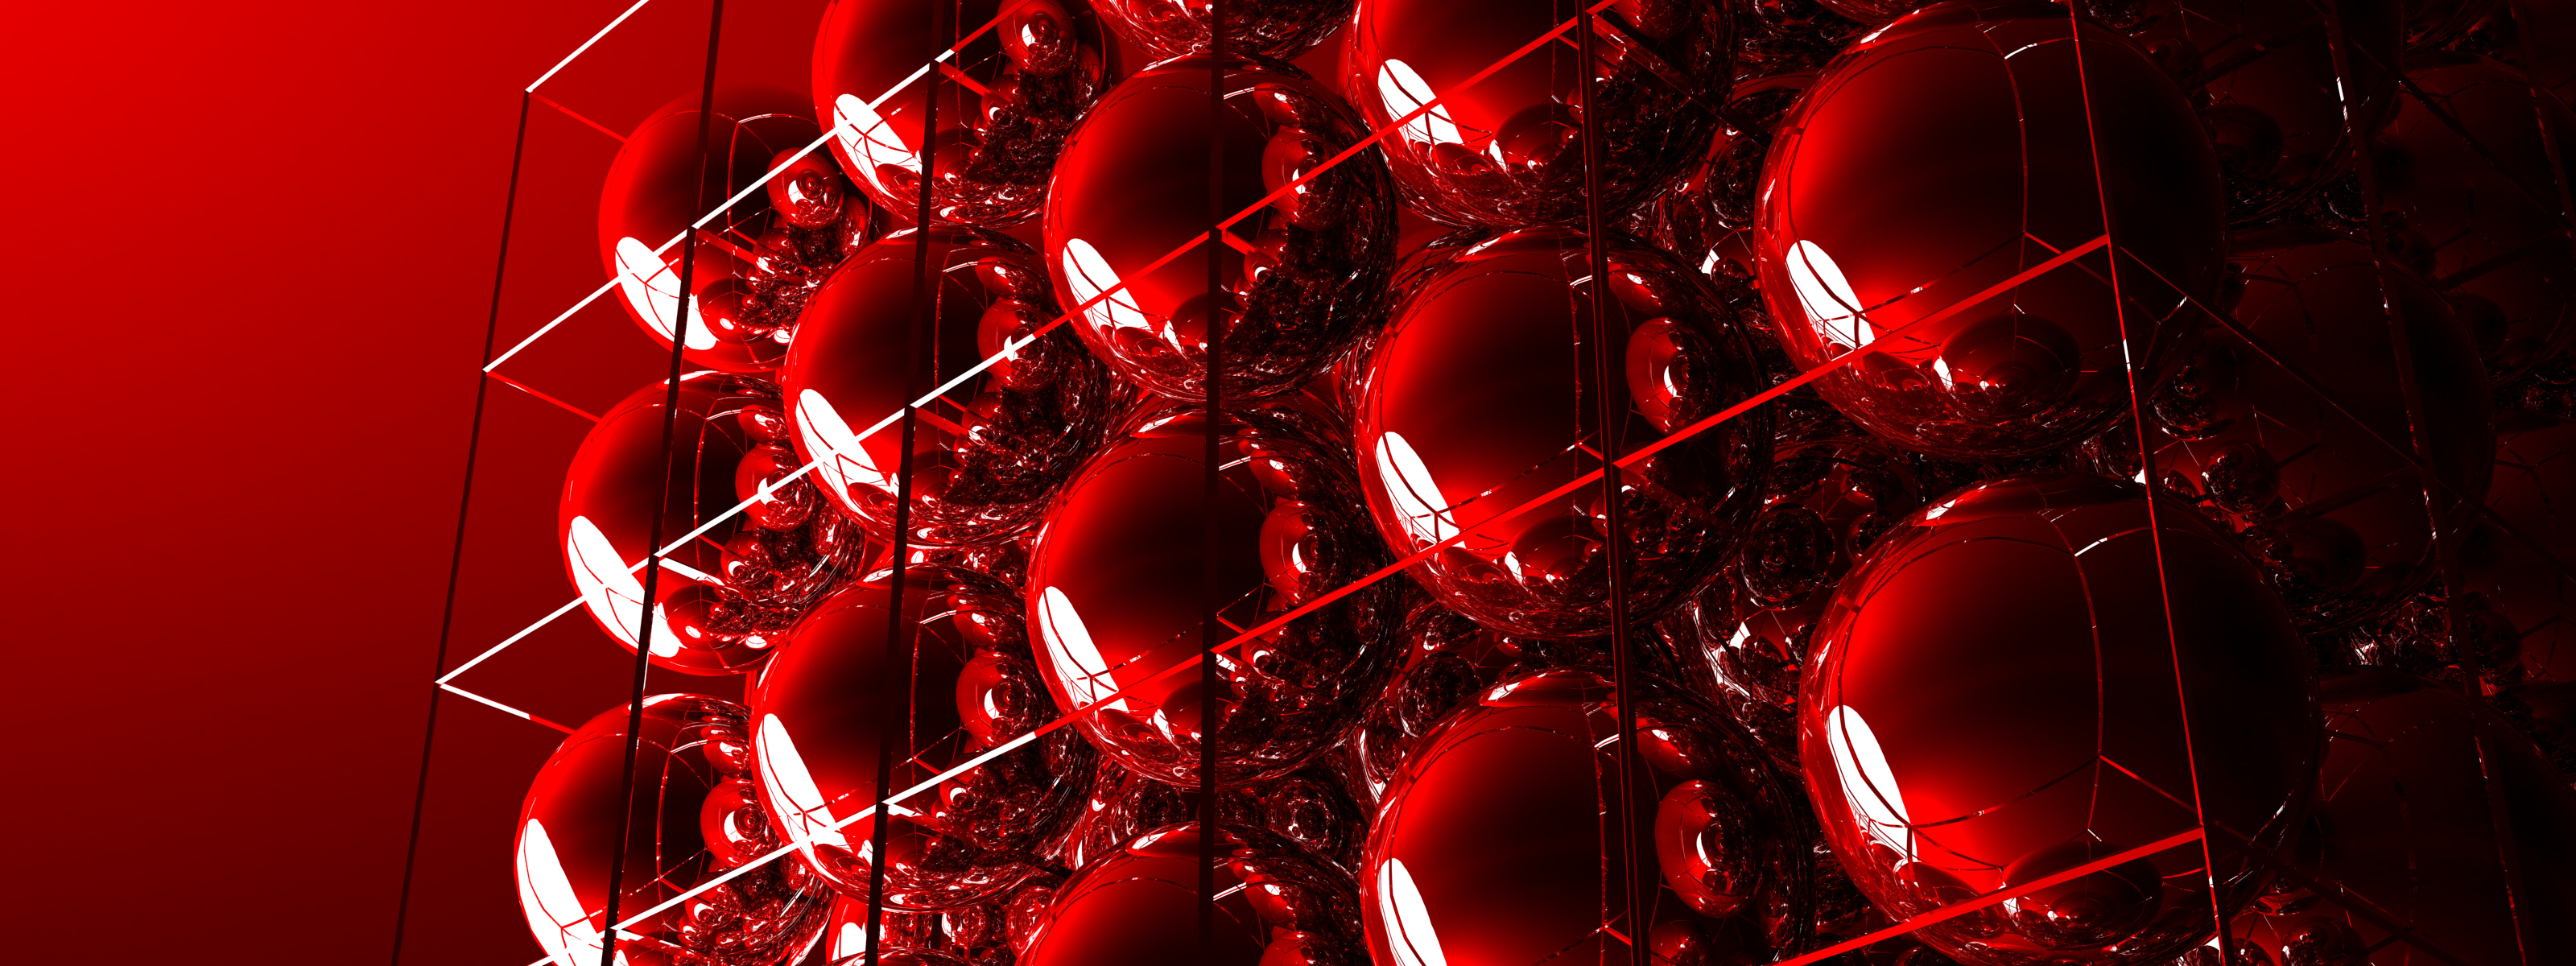 cgi, artistic, red, other home screen for smartphone